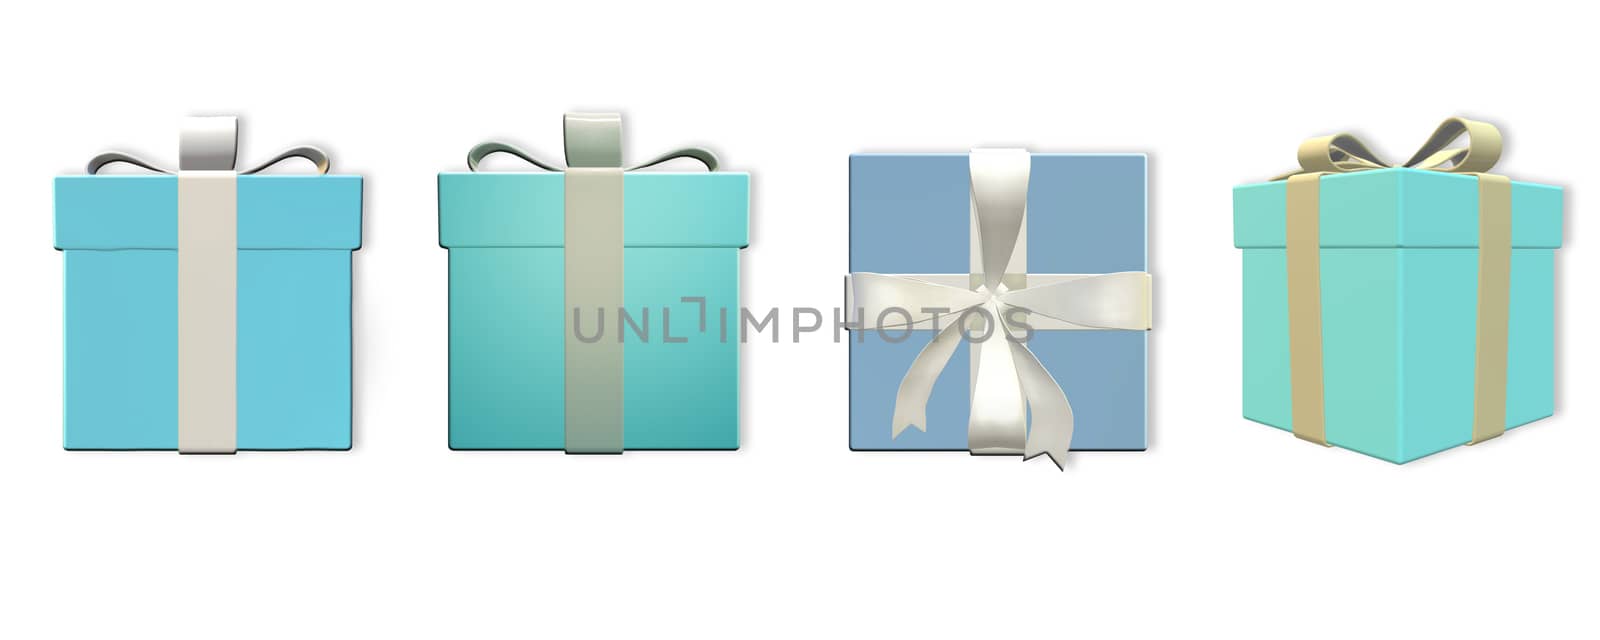 Holiday Christmas background with a border of turquoise blue gift boxes by NelliPolk